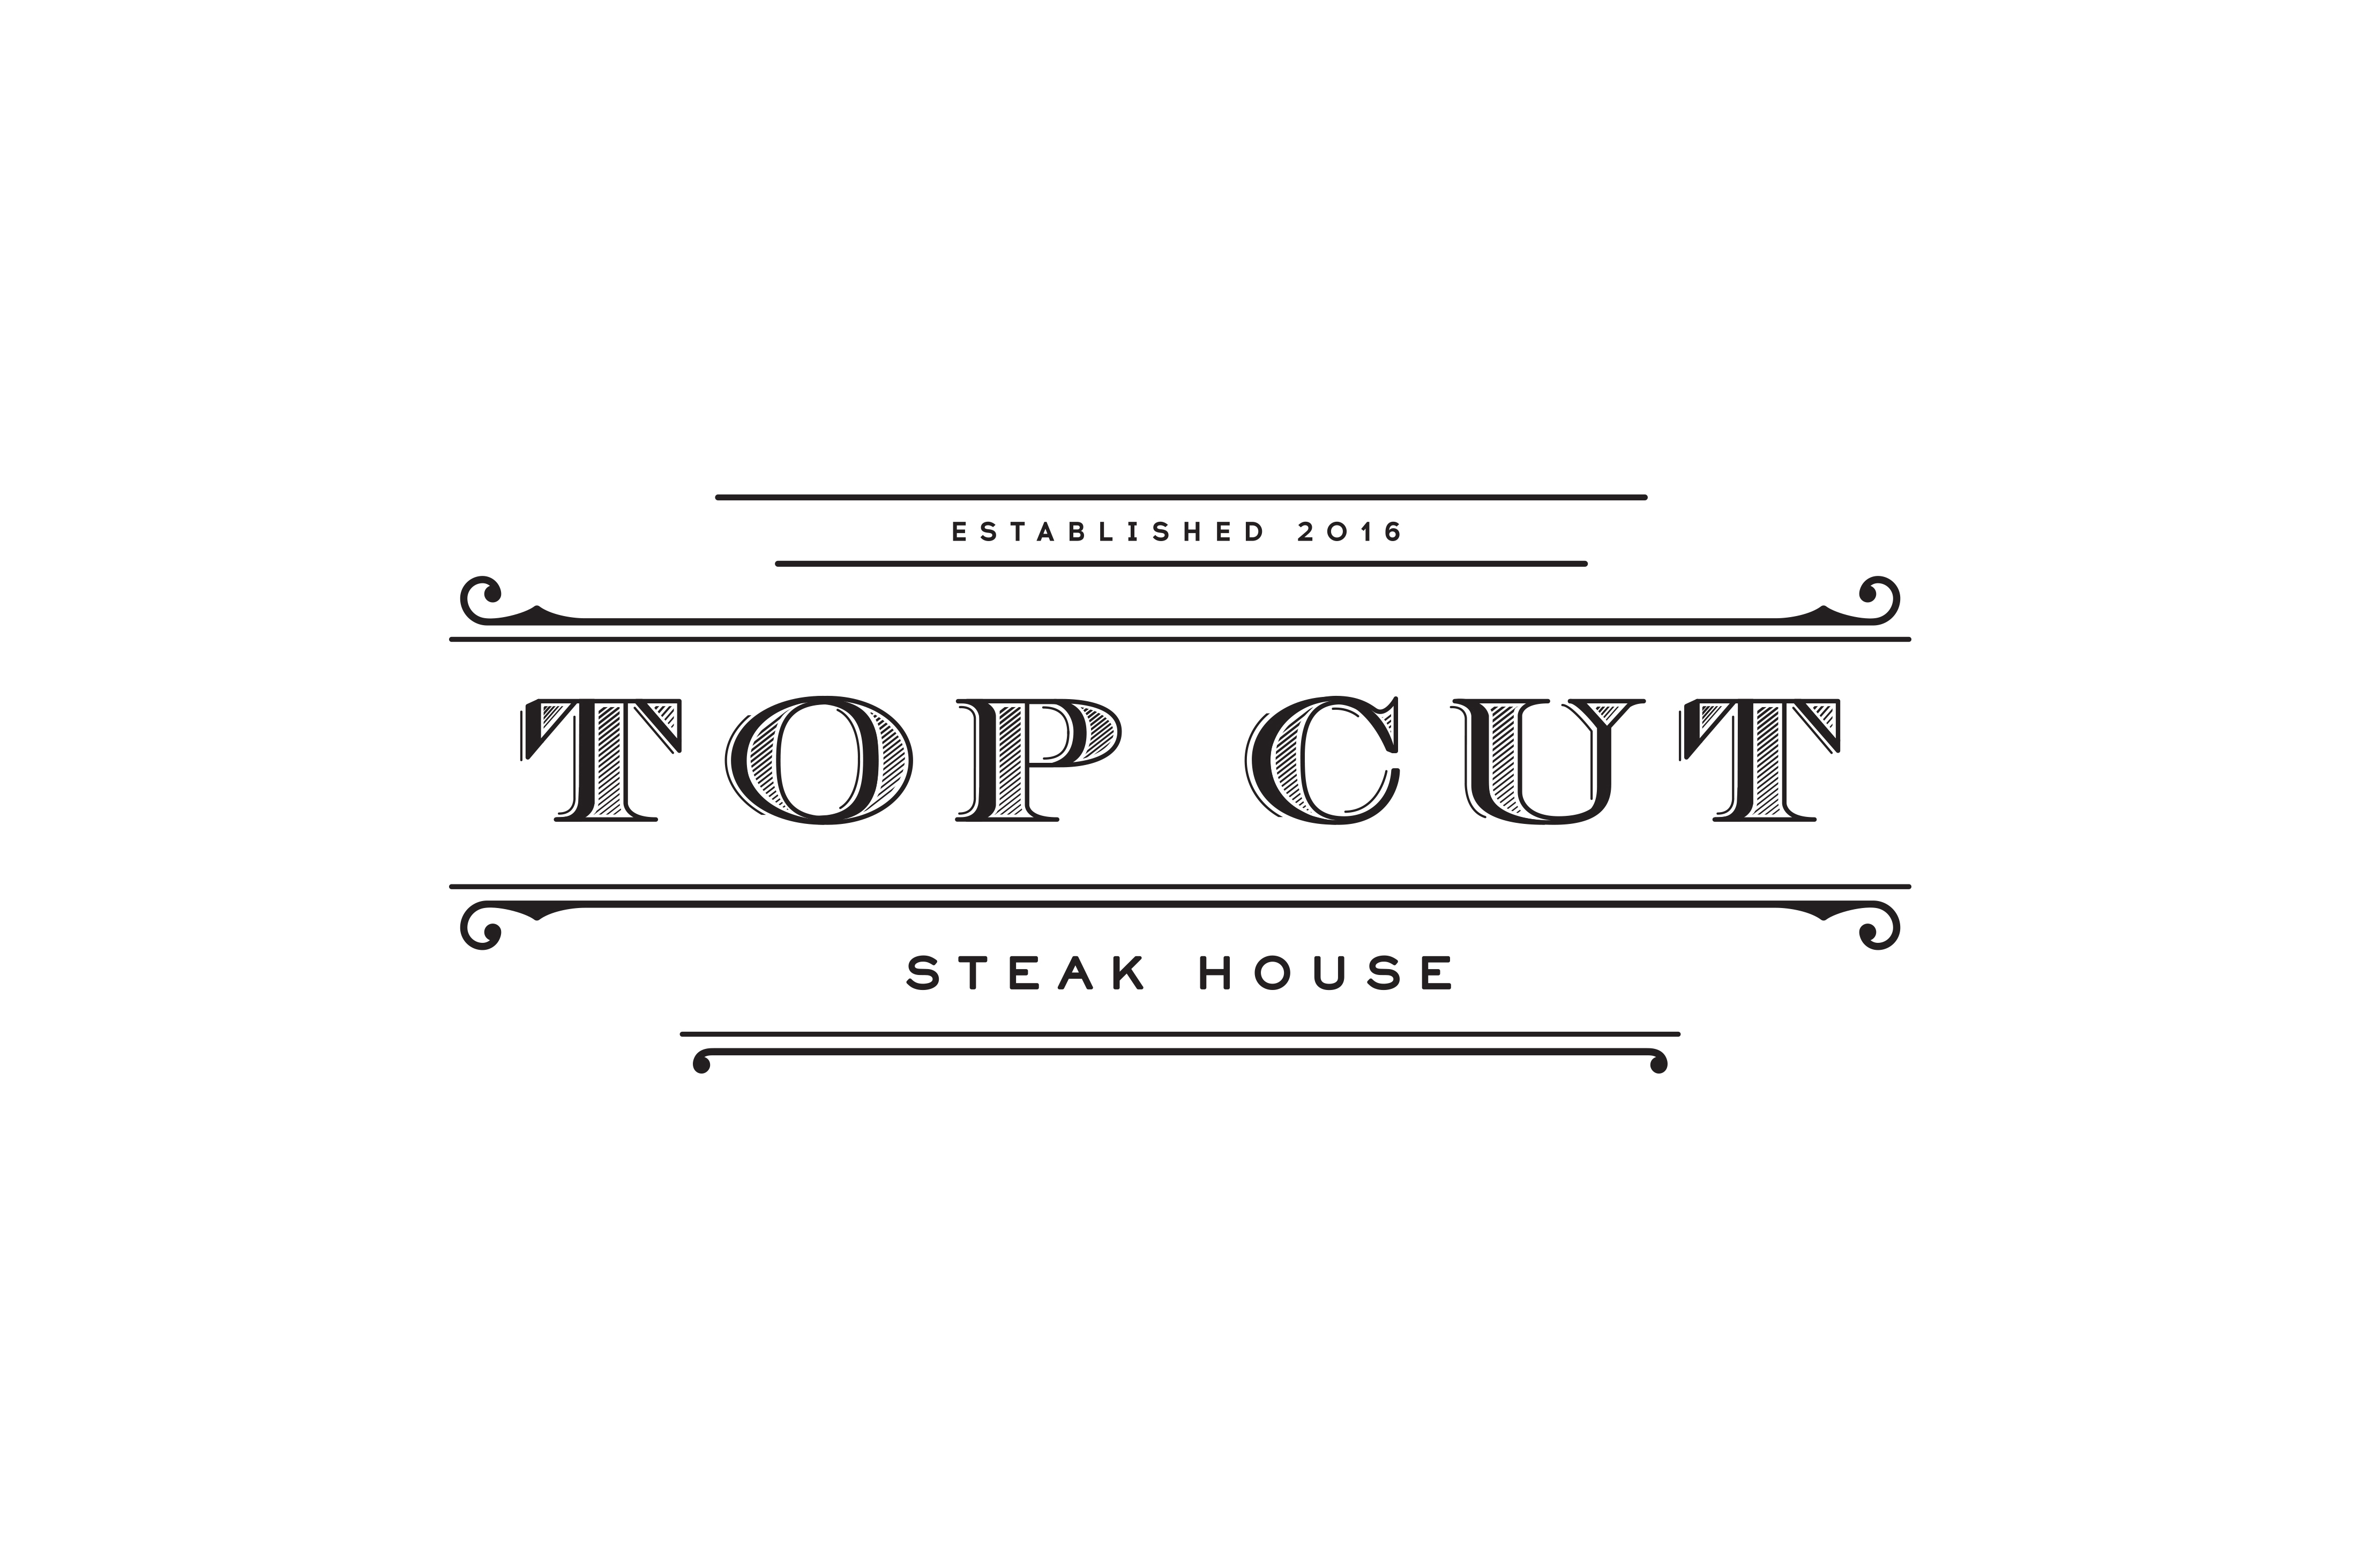 Top Cut Steakhouse now open on Melt's Rooftop in Center Valley, PA